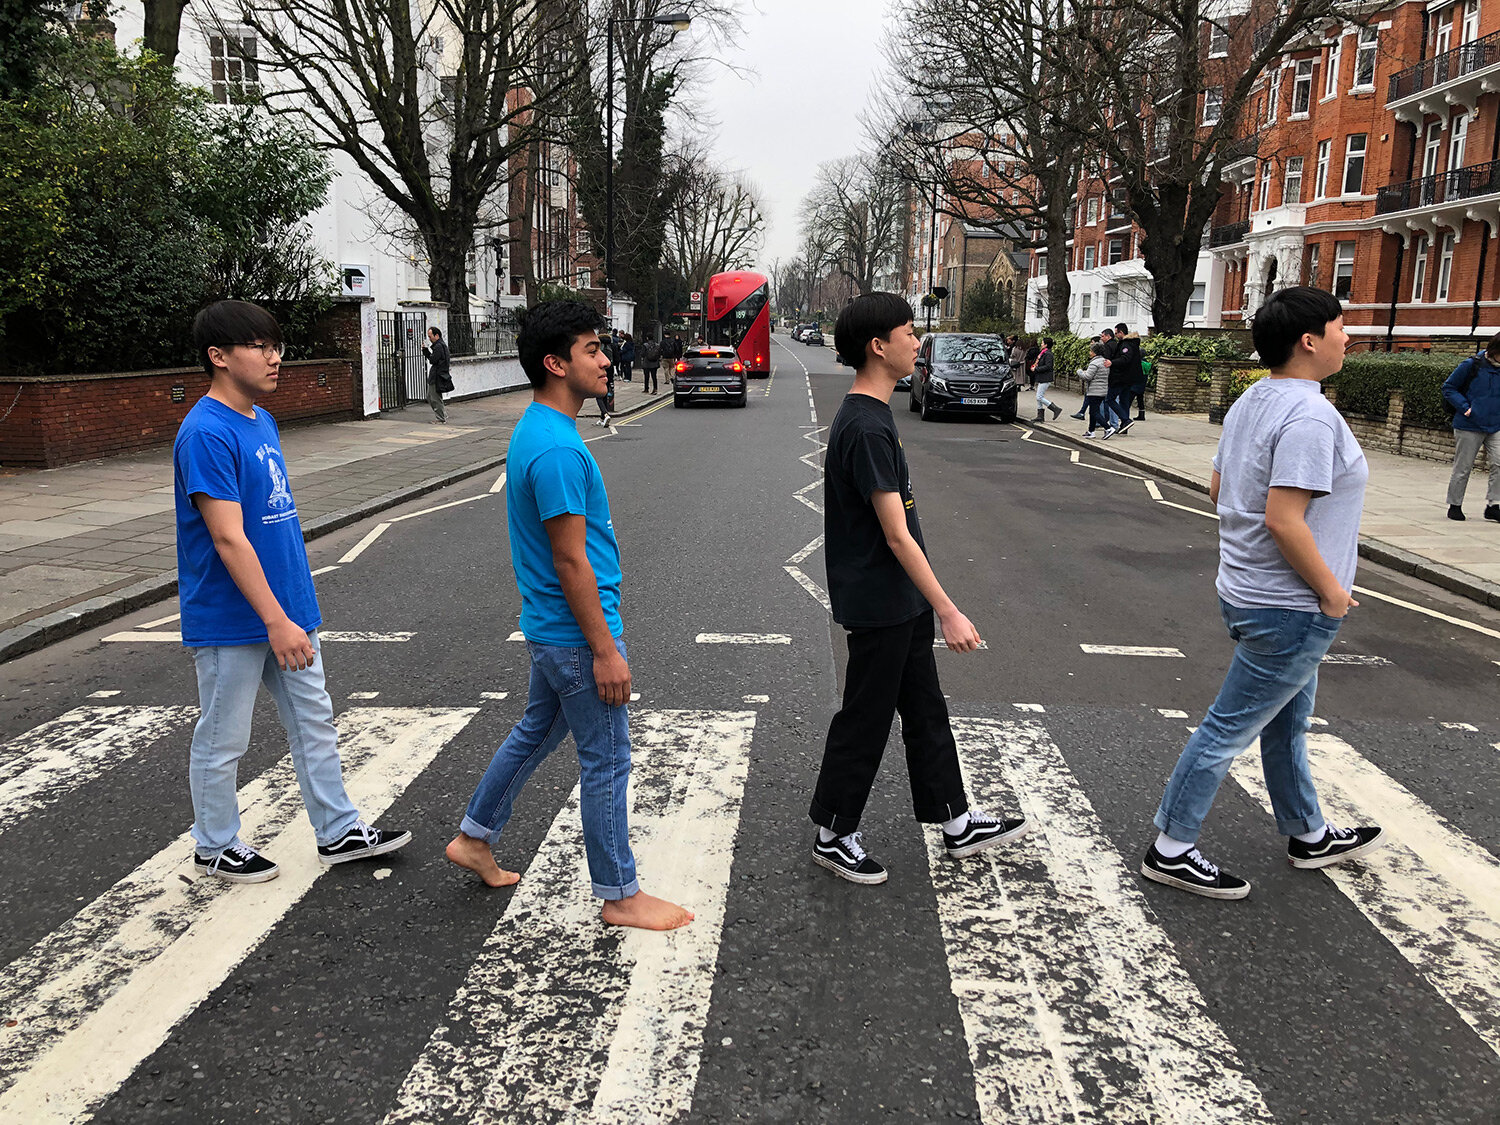  January 1, 2020: Abbey Road is the perfect place to begin the new decade! 